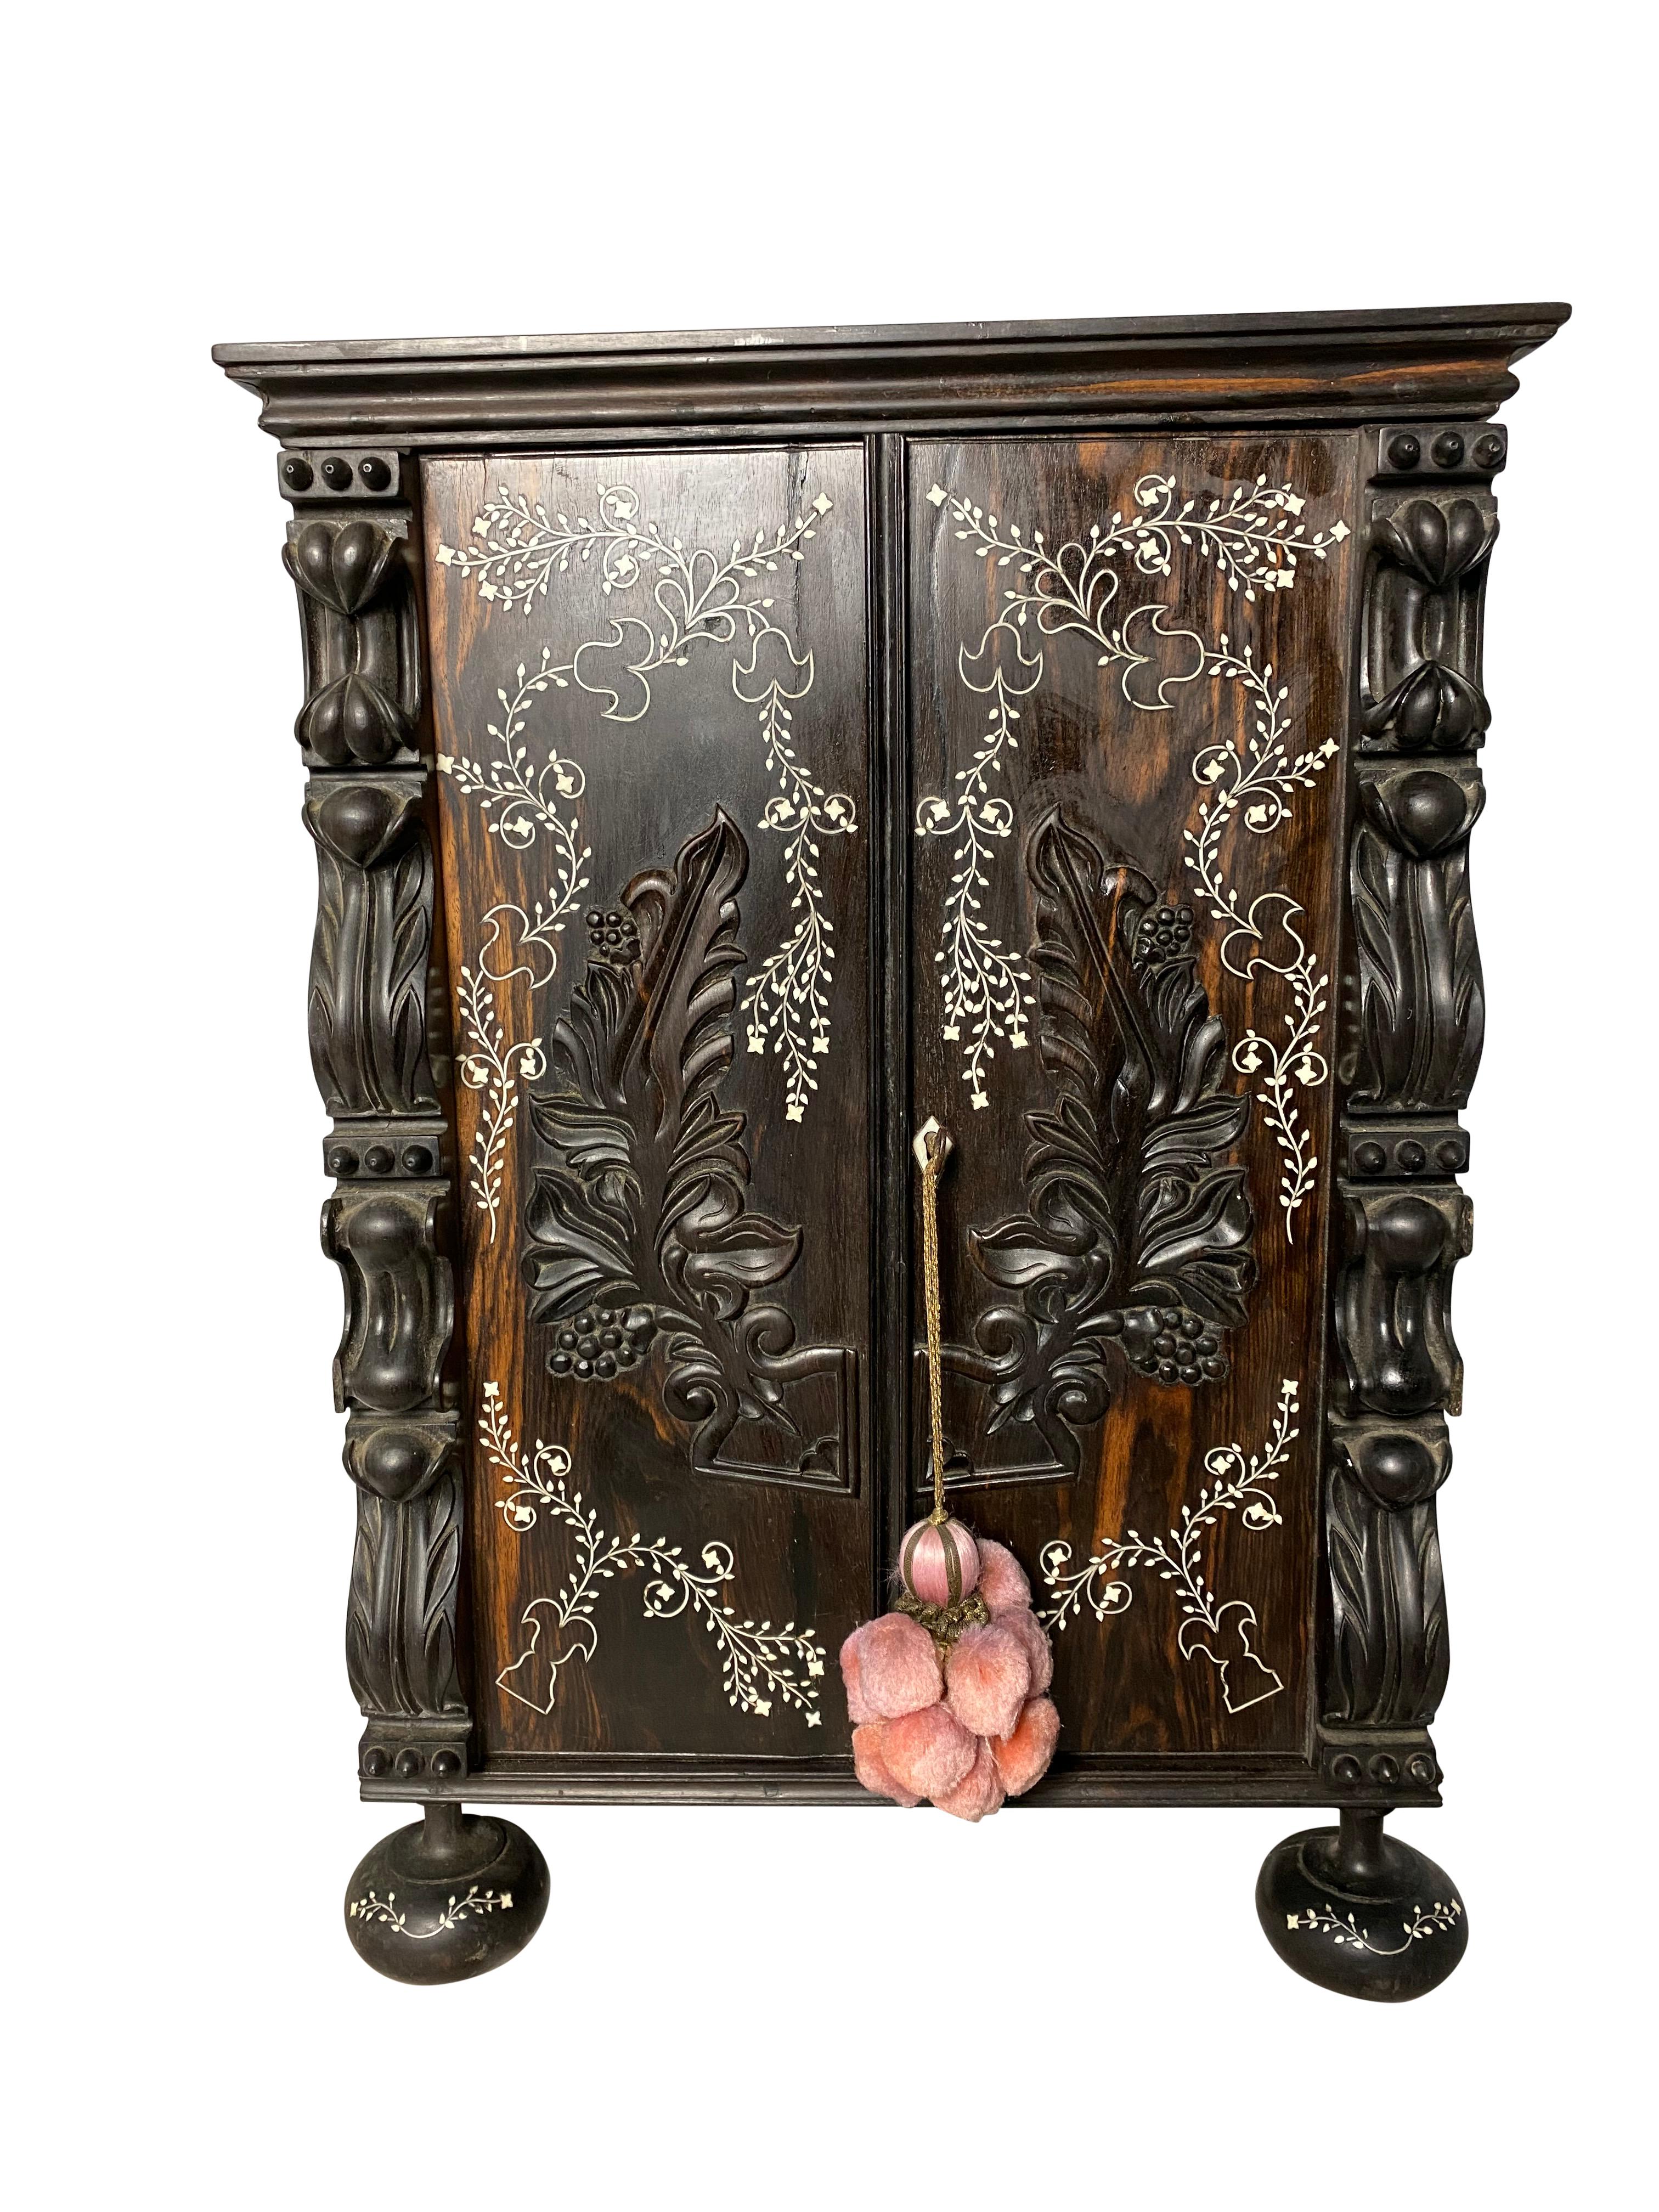 A dark Anglo-Indian ebony inlaid cabinet from the 19th century. With large spaces inside for storage and with both floral carvings and embellishments, this cabinet is suitable for both decoration and use. 

Dimensions (cm)
H50/W34/D22.